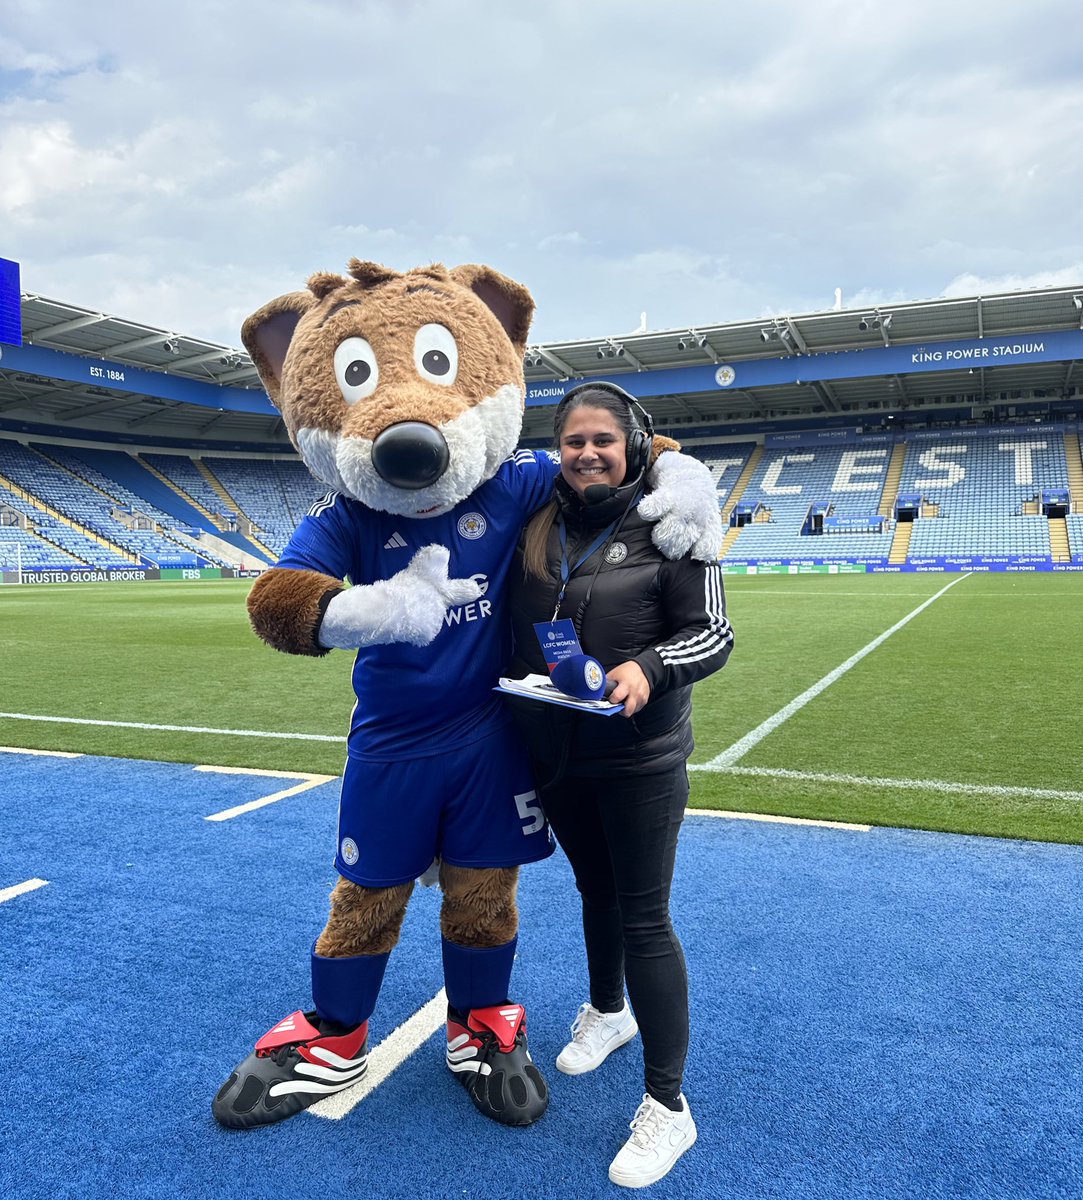 Another season as stadium announcer of @LCFC_Women has come to an end. It’s been a total pleasure being on the mic for some of the best moments of the 23/24 campaign at both the King Power & Pirelli Stadium. Thanks for having me! 🎤